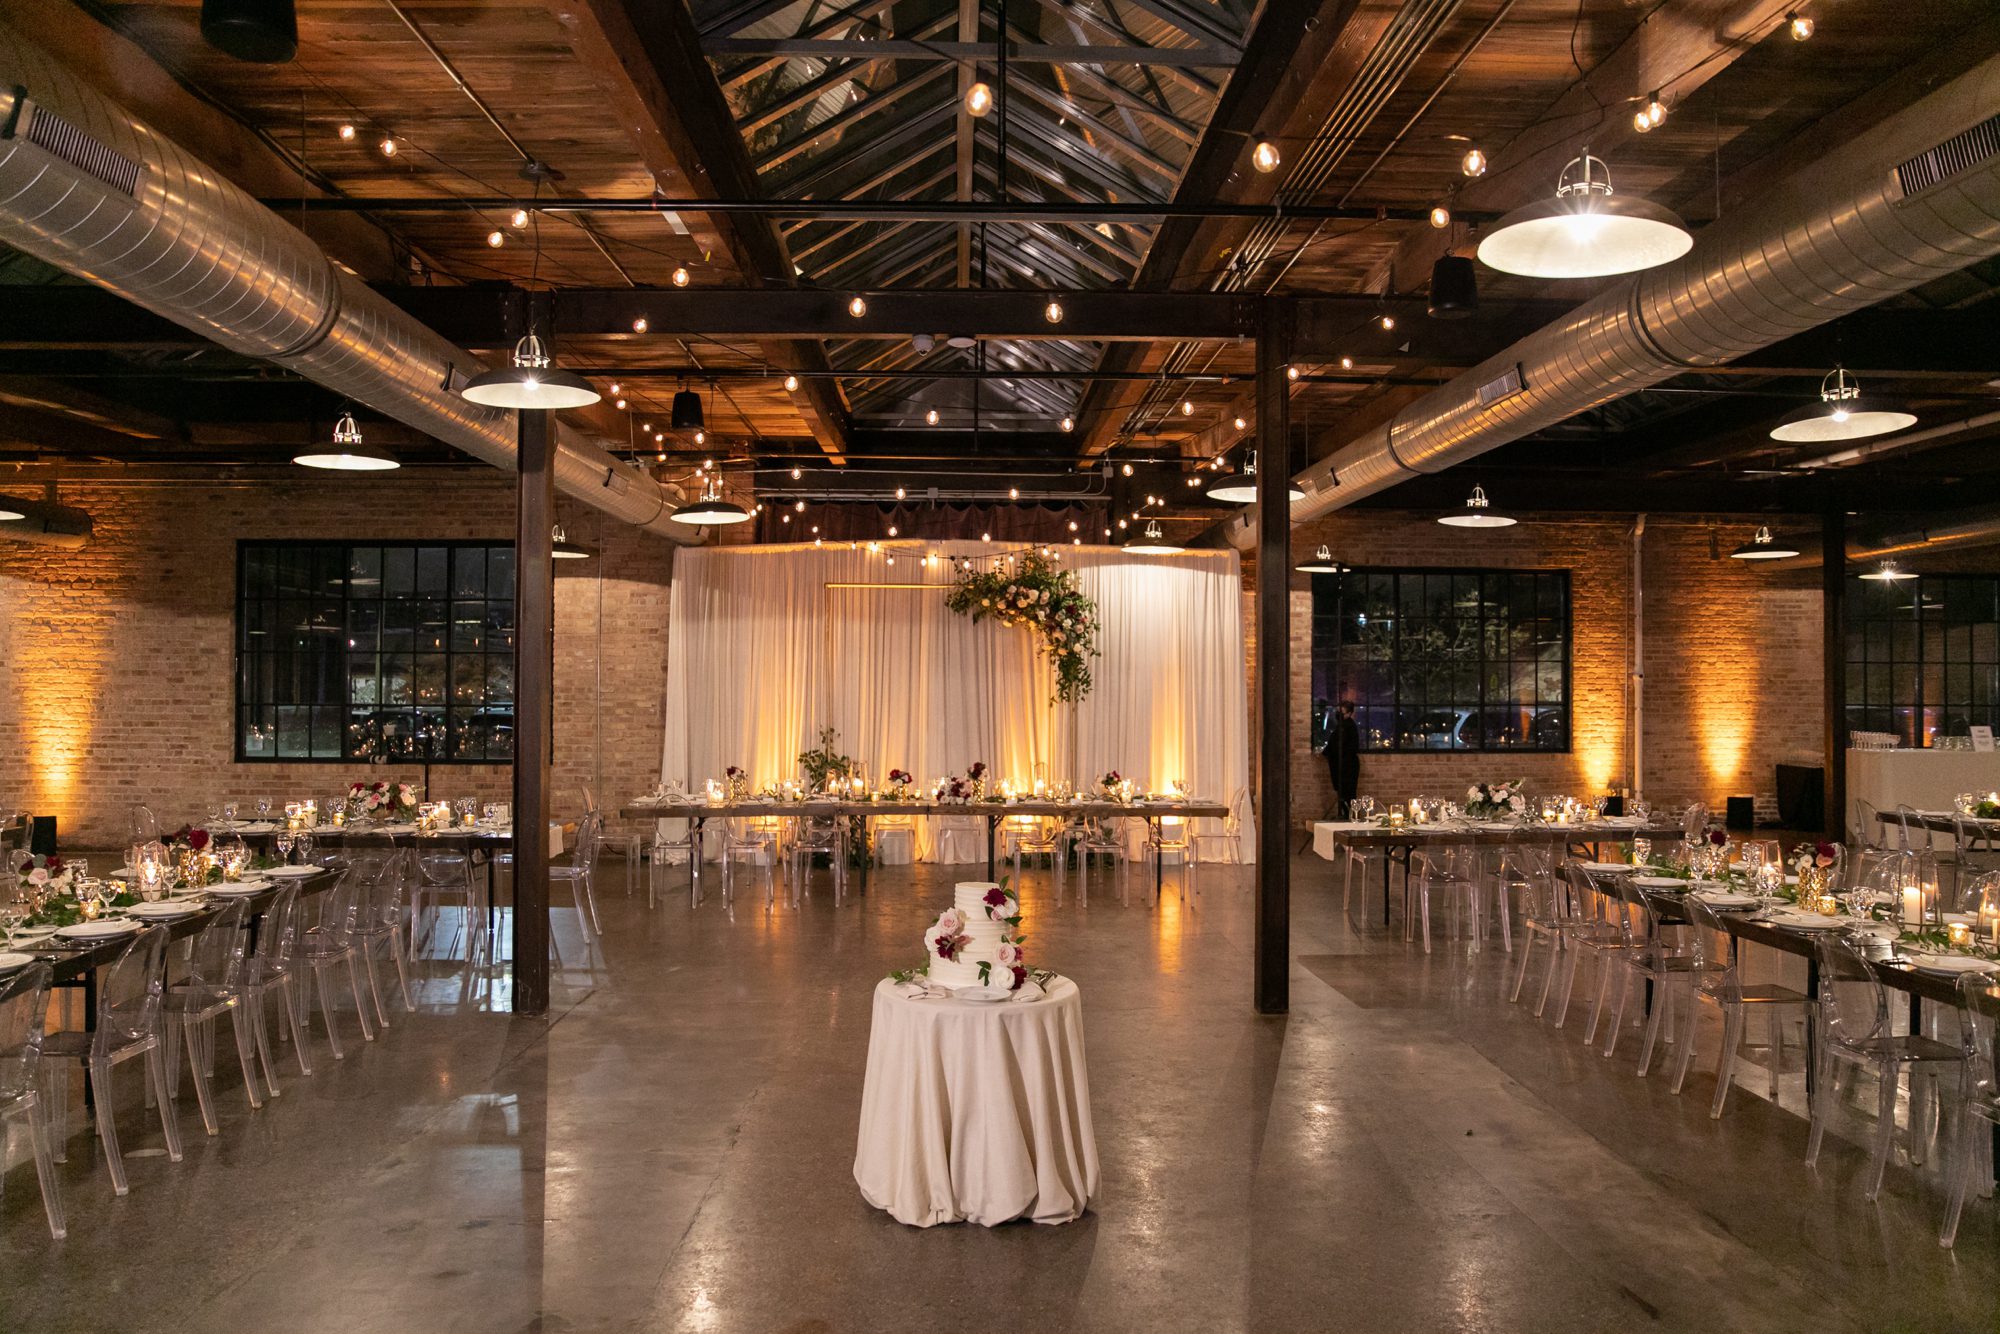 the couple had a gorgeous wedding reception at Morgan Manufacturing